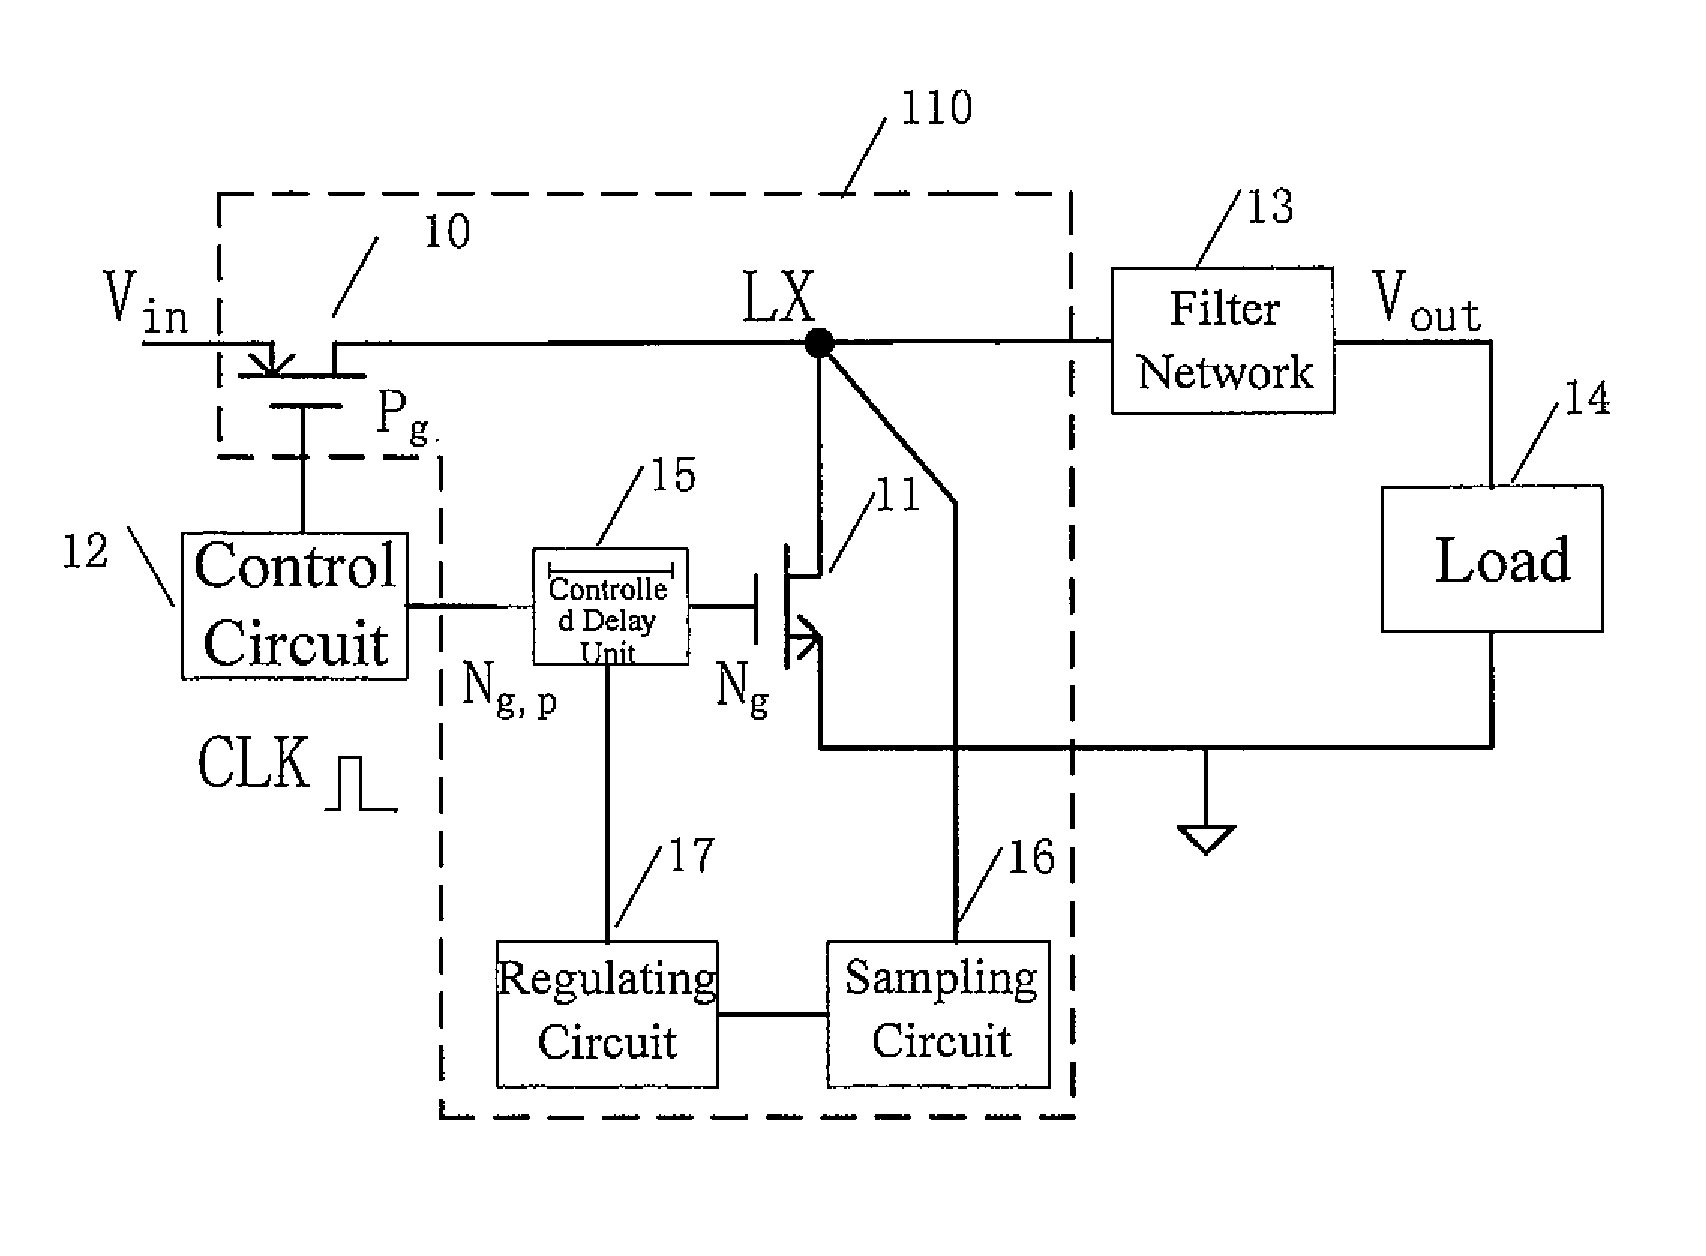 Switch level circuit with dead time self-adapting control